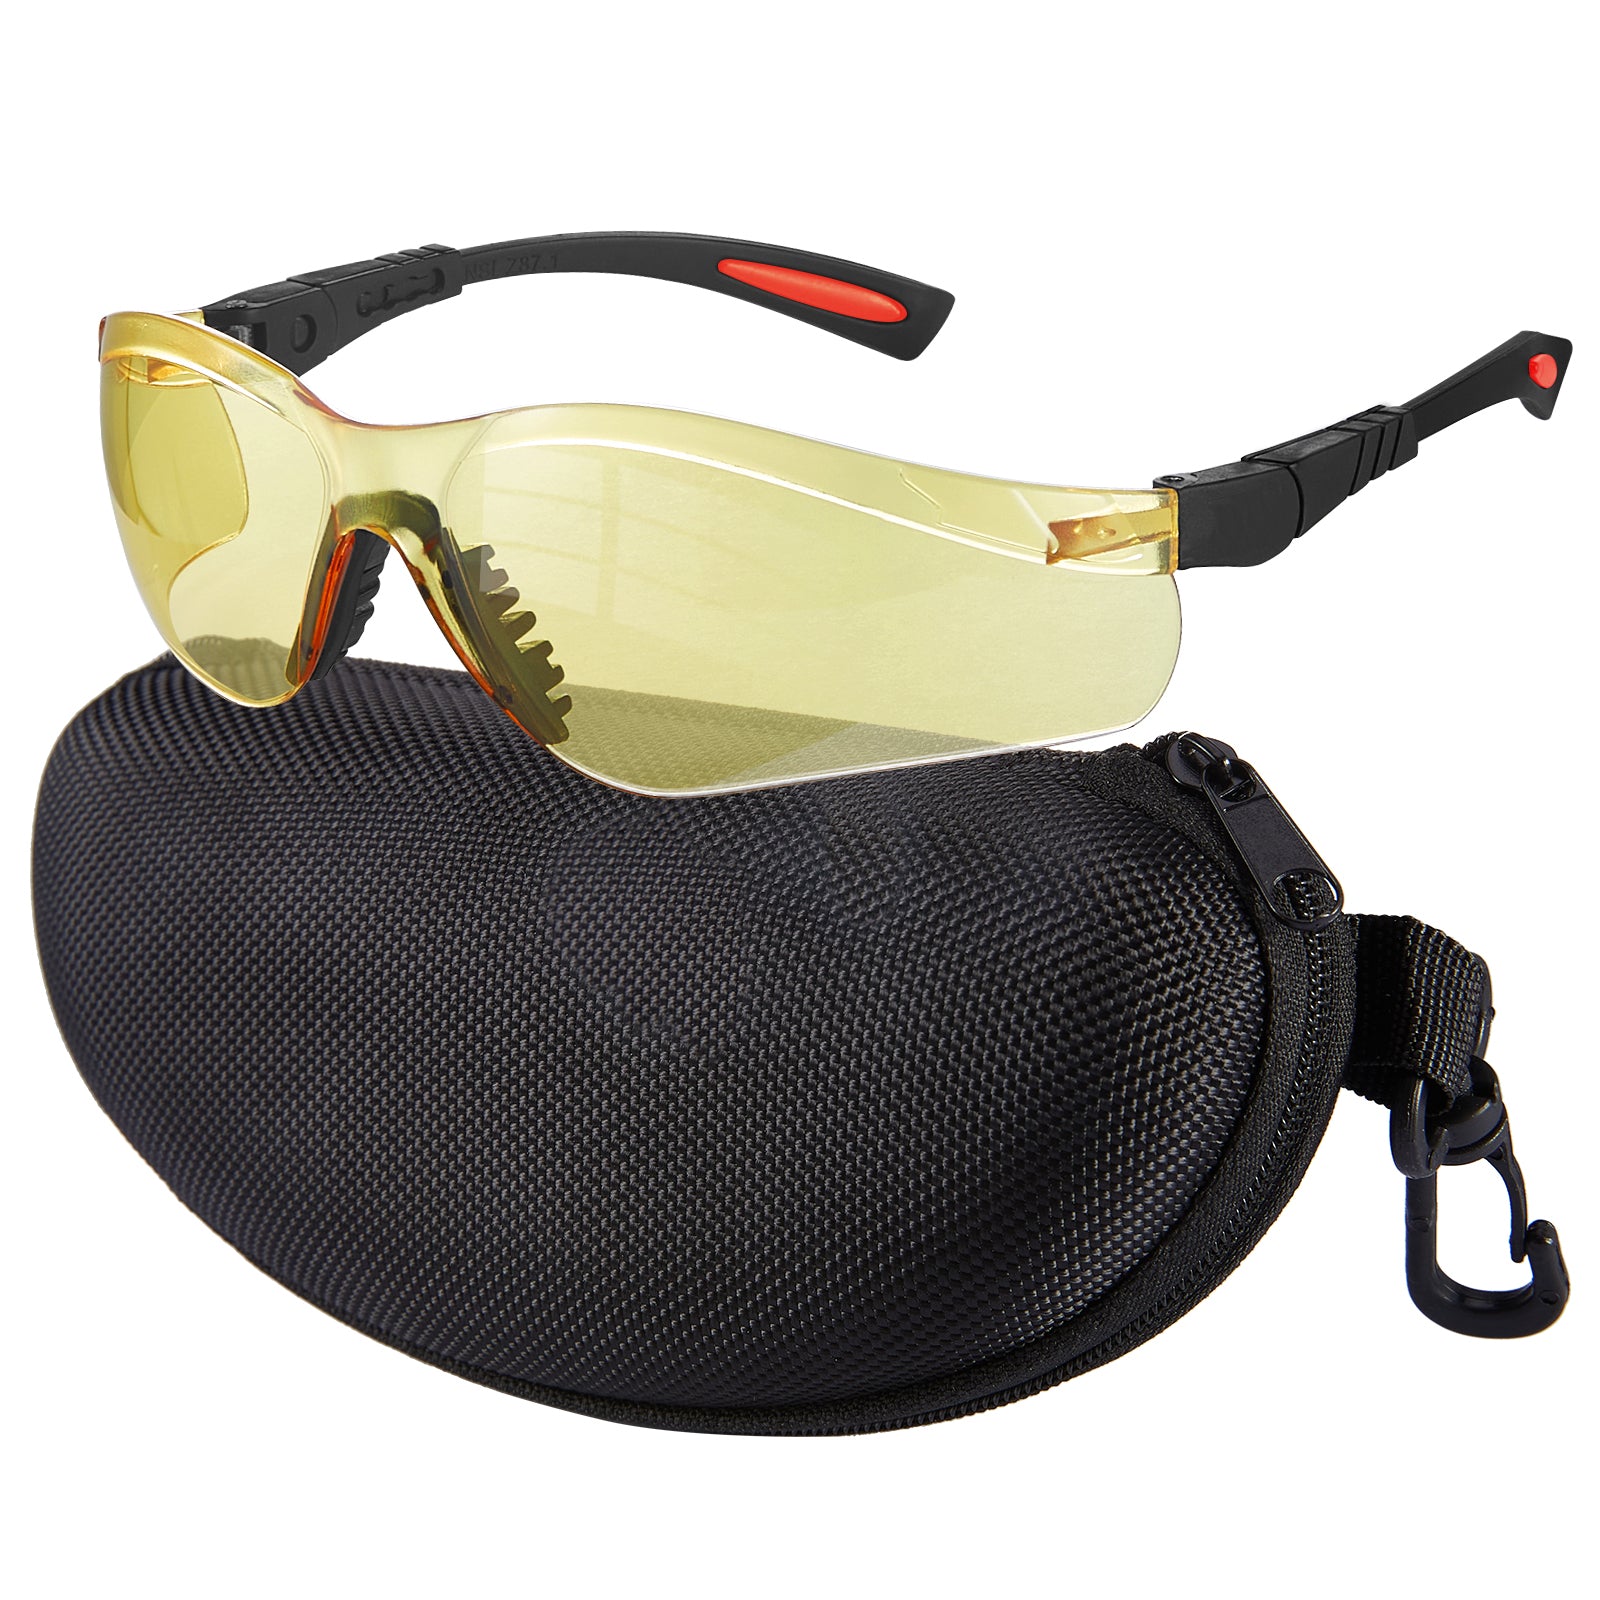 Shooting Glasses Anti-fog Shooting Range Eye Protection for Men Women, Adjustable Angle and Length Safety Glasses with Zipper Hard Case